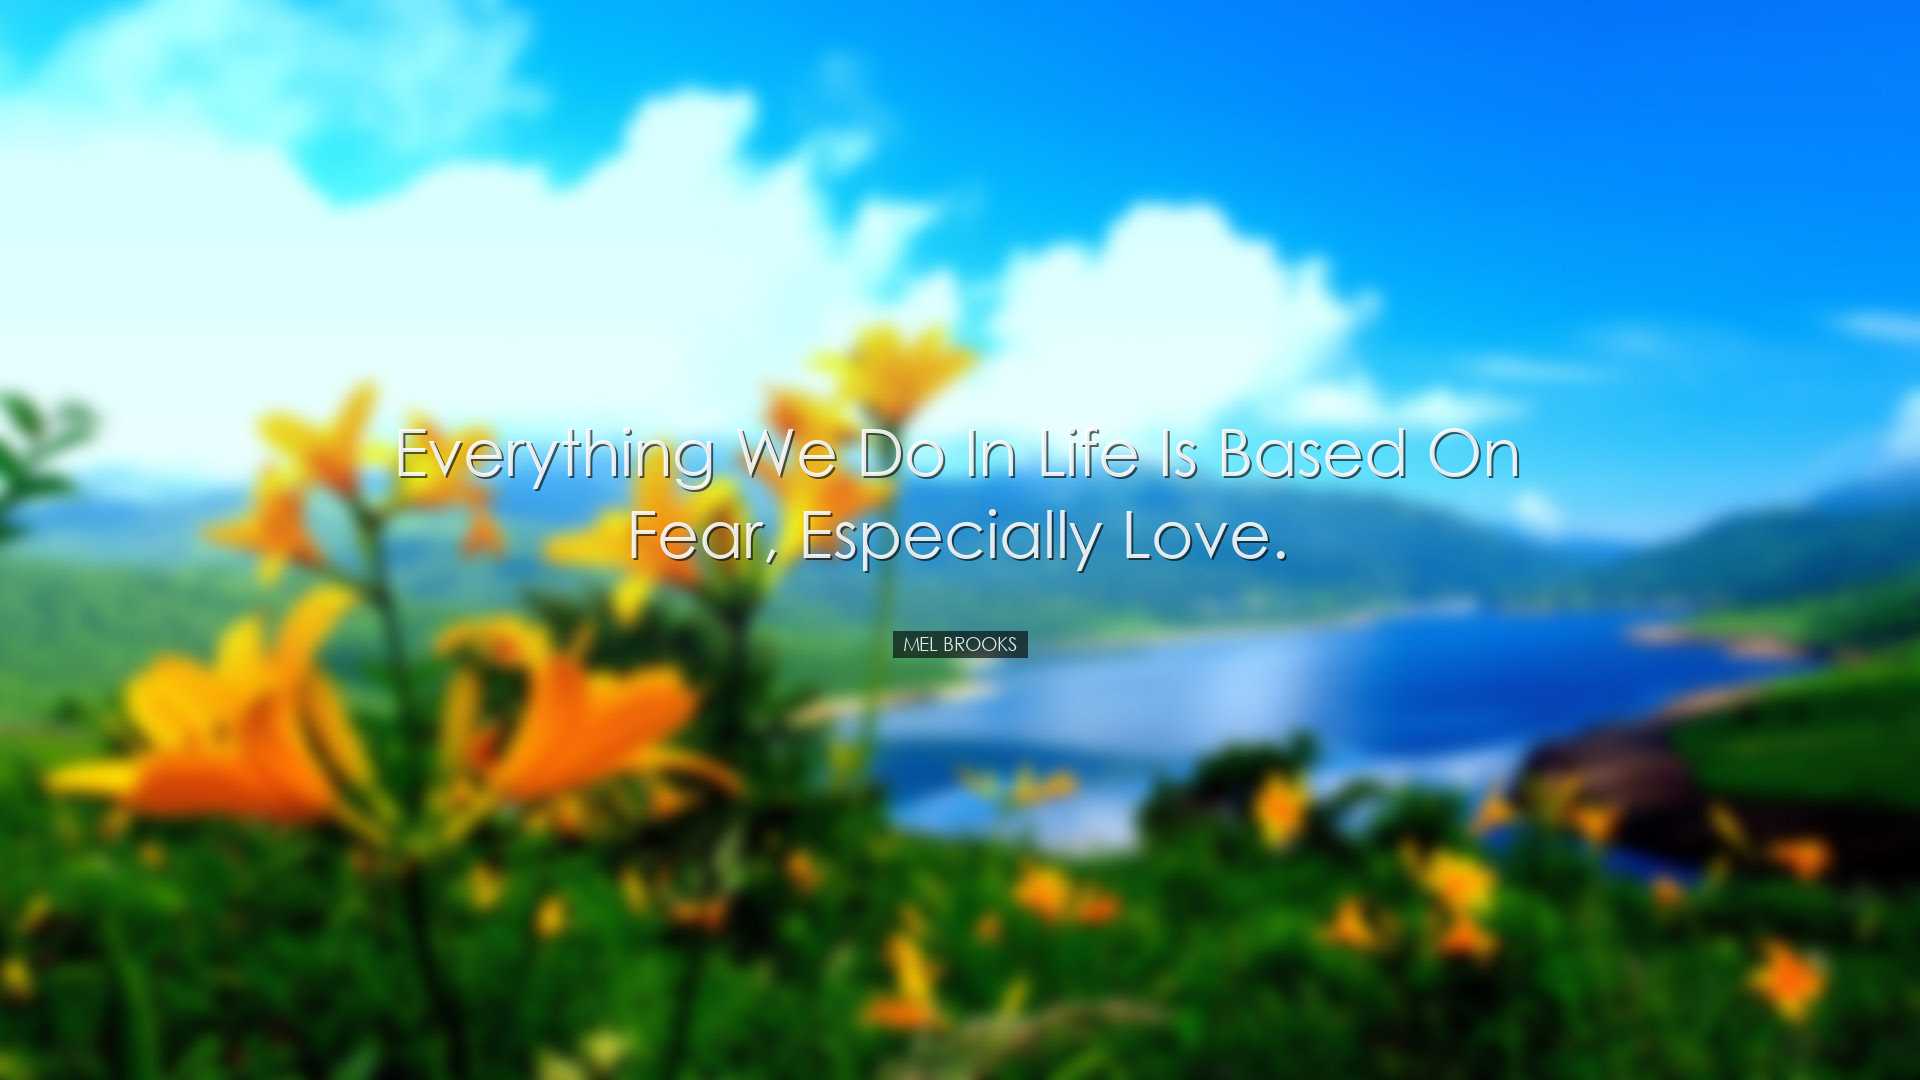 Everything we do in life is based on fear, especially love. - Mel